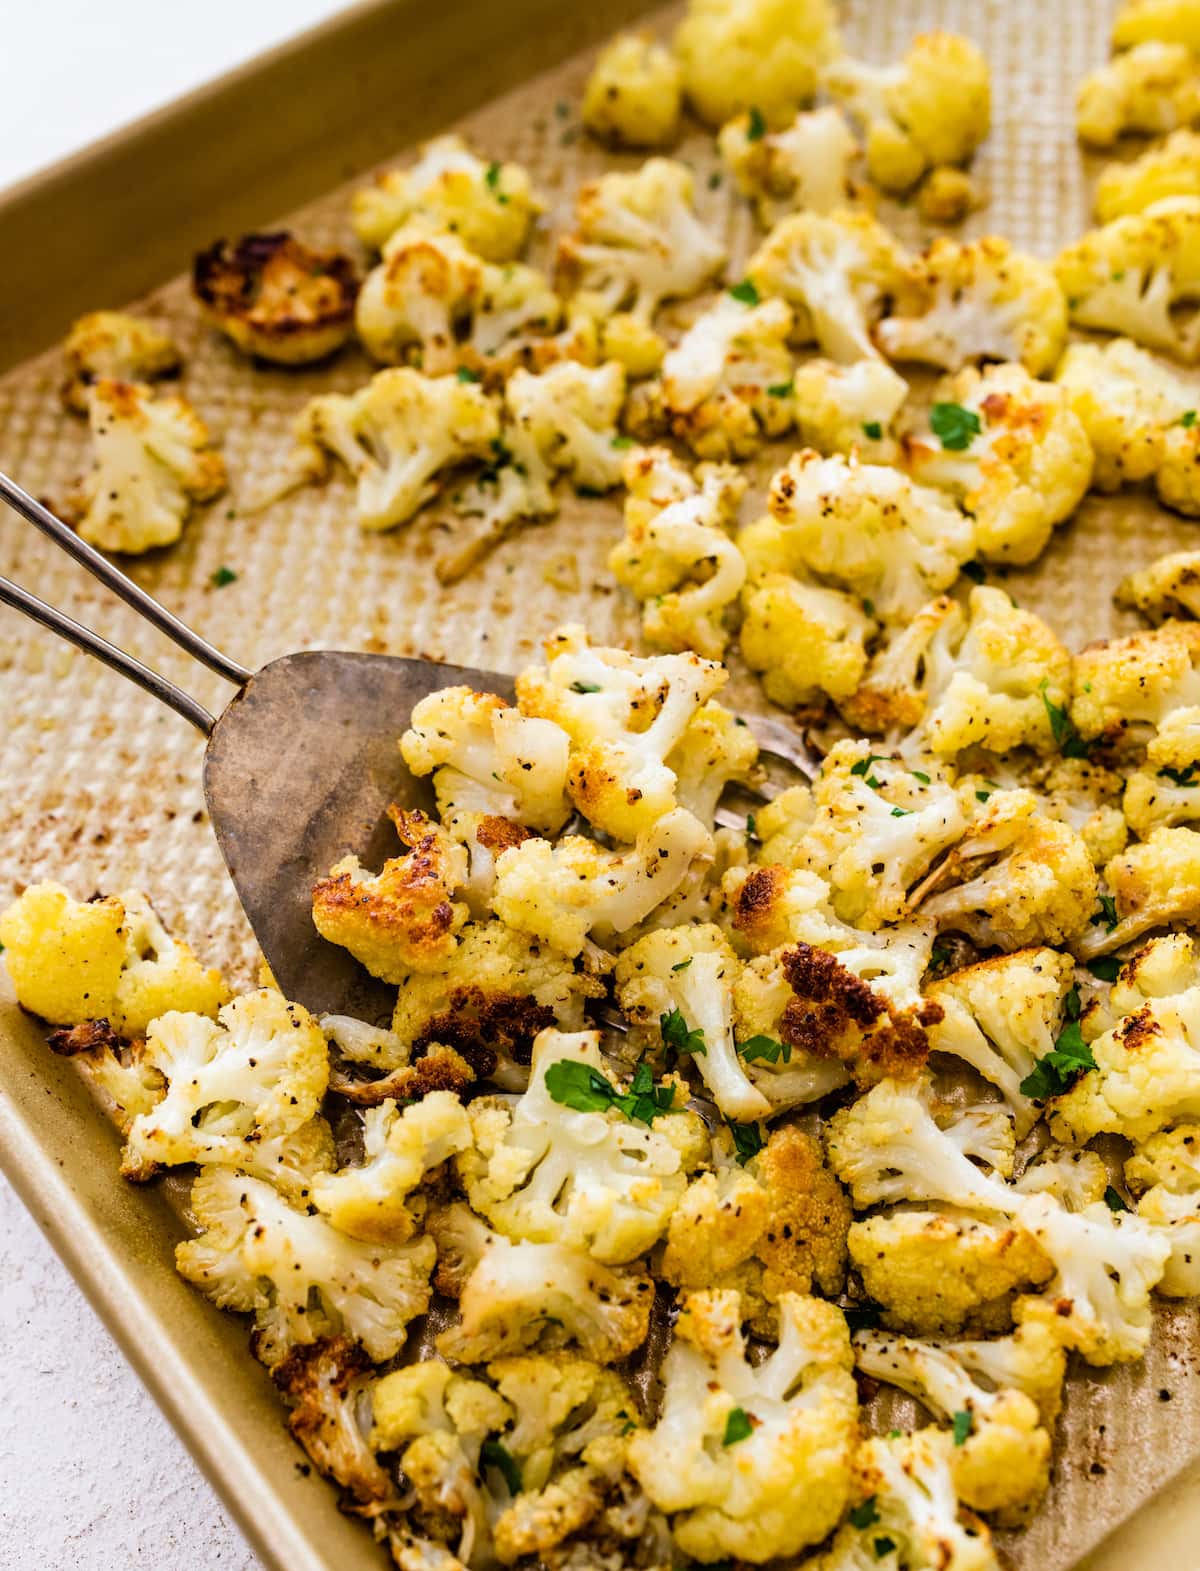 Roasted cauliflower on a baking sheet with a metal spatula scooping up some of the cauliflower.